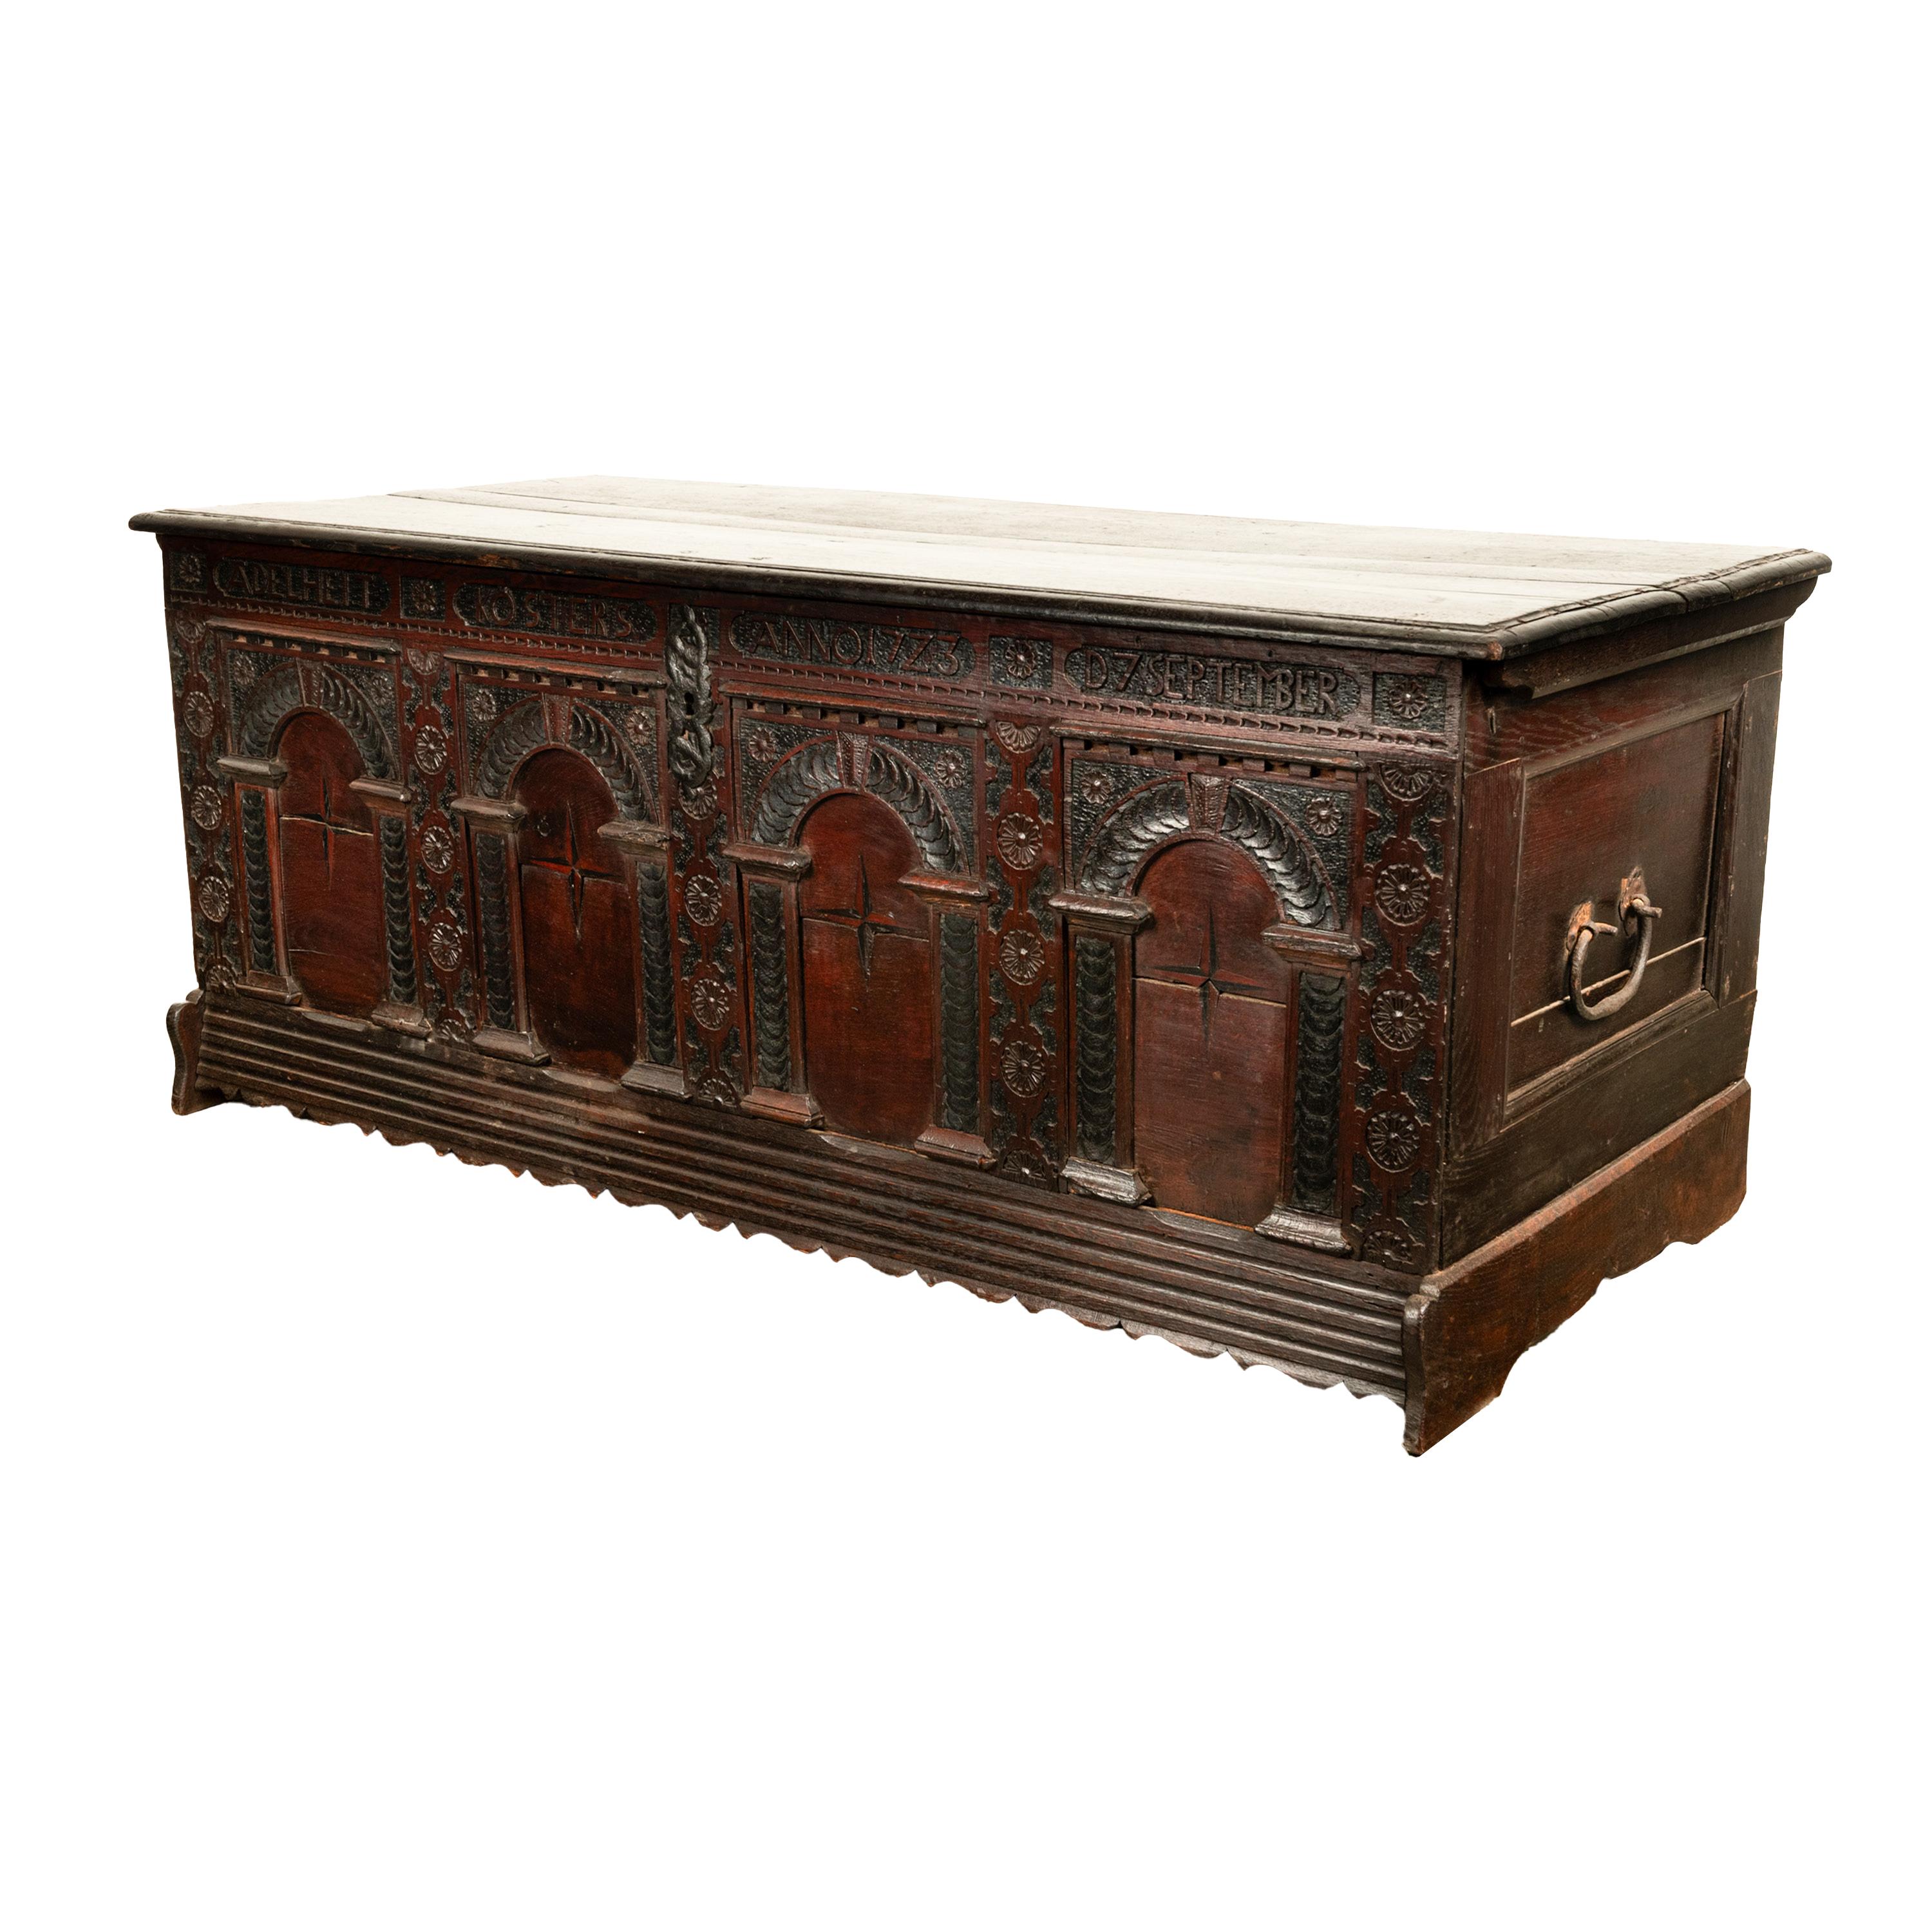 Antique Monumental German Carved Oak Baroque Marquetry Dowry Chest Coffer 1723 In Good Condition For Sale In Portland, OR